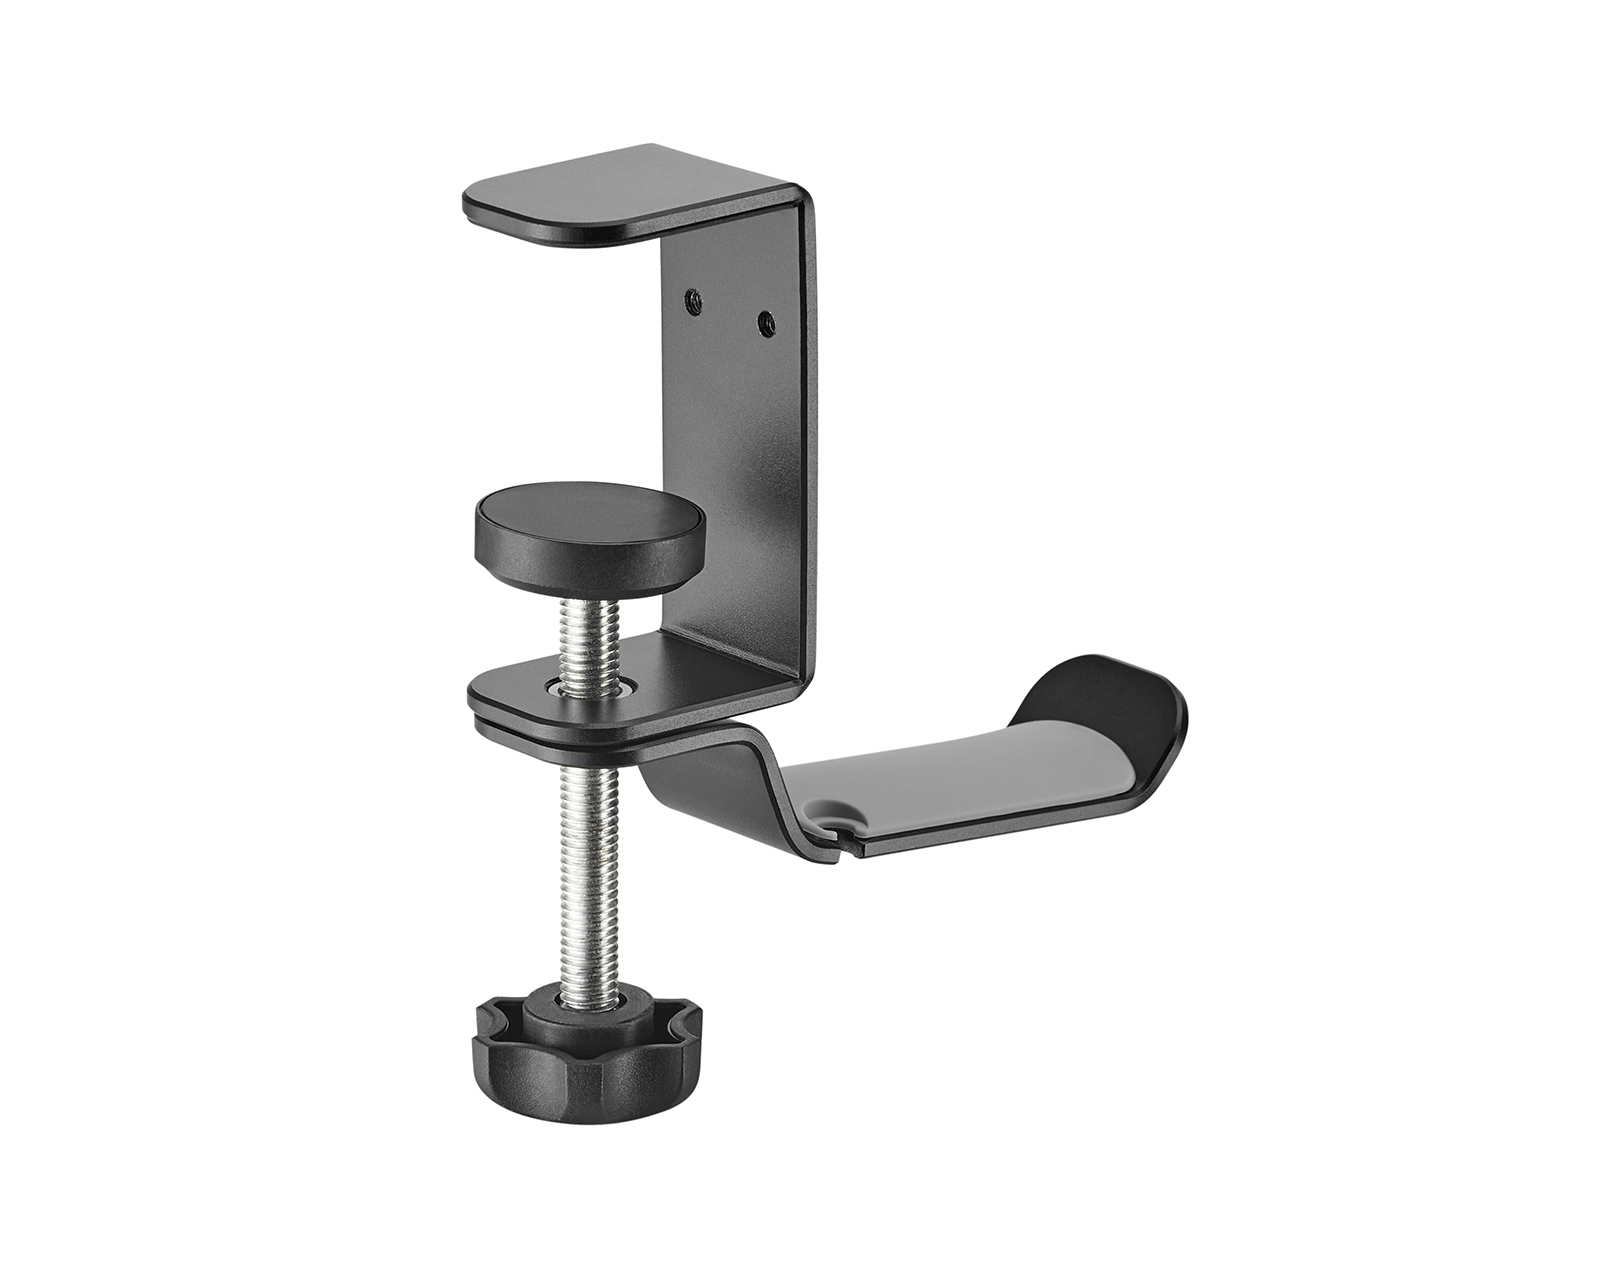 Black Clamp-on Headphone Holder – VIVO - desk solutions, screen mounting,  and more